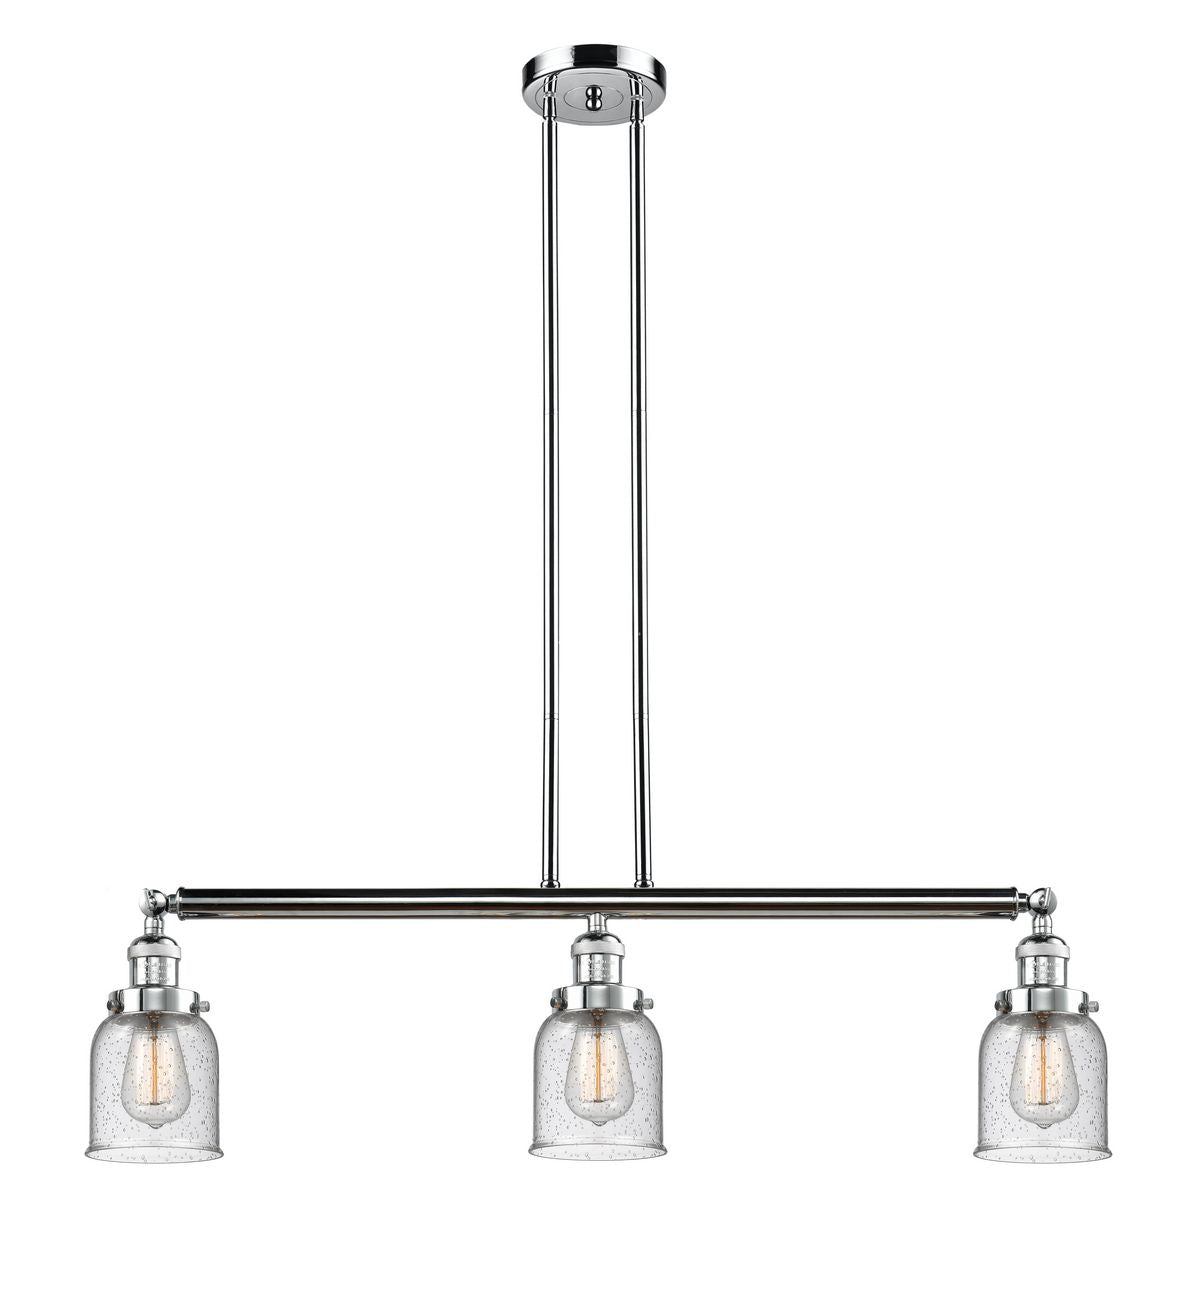 213-PC-G54 3-Light 37.5" Polished Chrome Island Light - Seedy Small Bell Glass - LED Bulb - Dimmensions: 37.5 x 7.5 x 10<br>Minimum Height : 20<br>Maximum Height : 44 - Sloped Ceiling Compatible: Yes